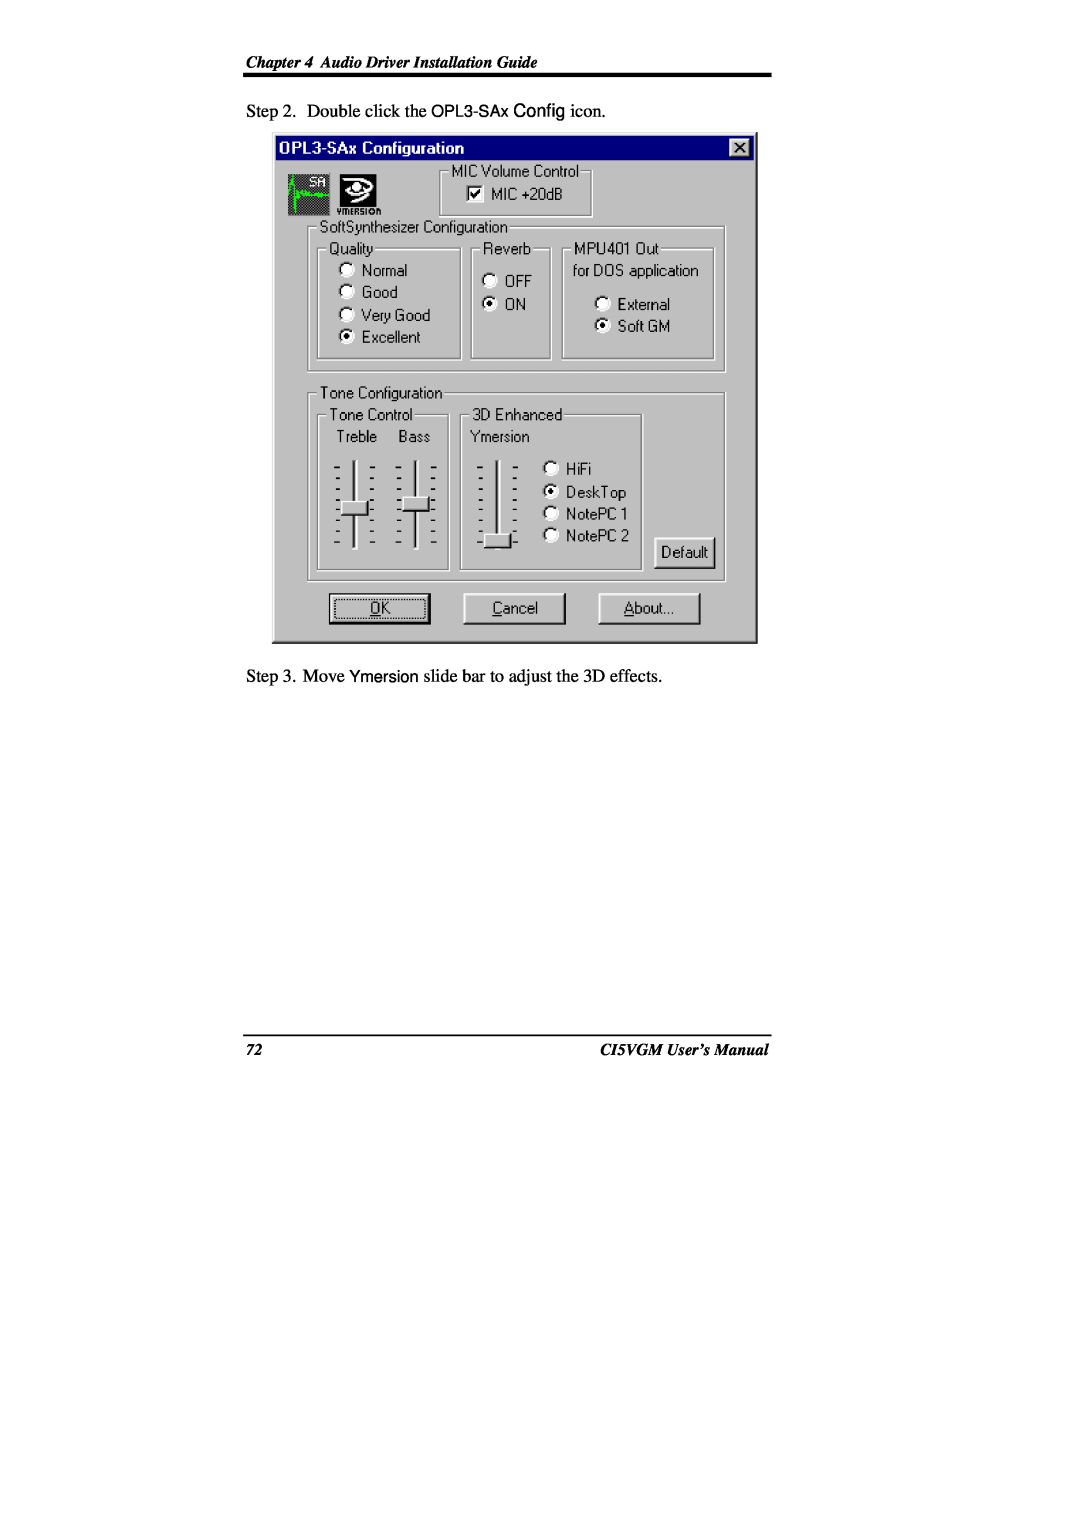 IBM CI5VGM Series user manual Double click the OPL3-SAx Config icon, Move Ymersion slide bar to adjust the 3D effects 